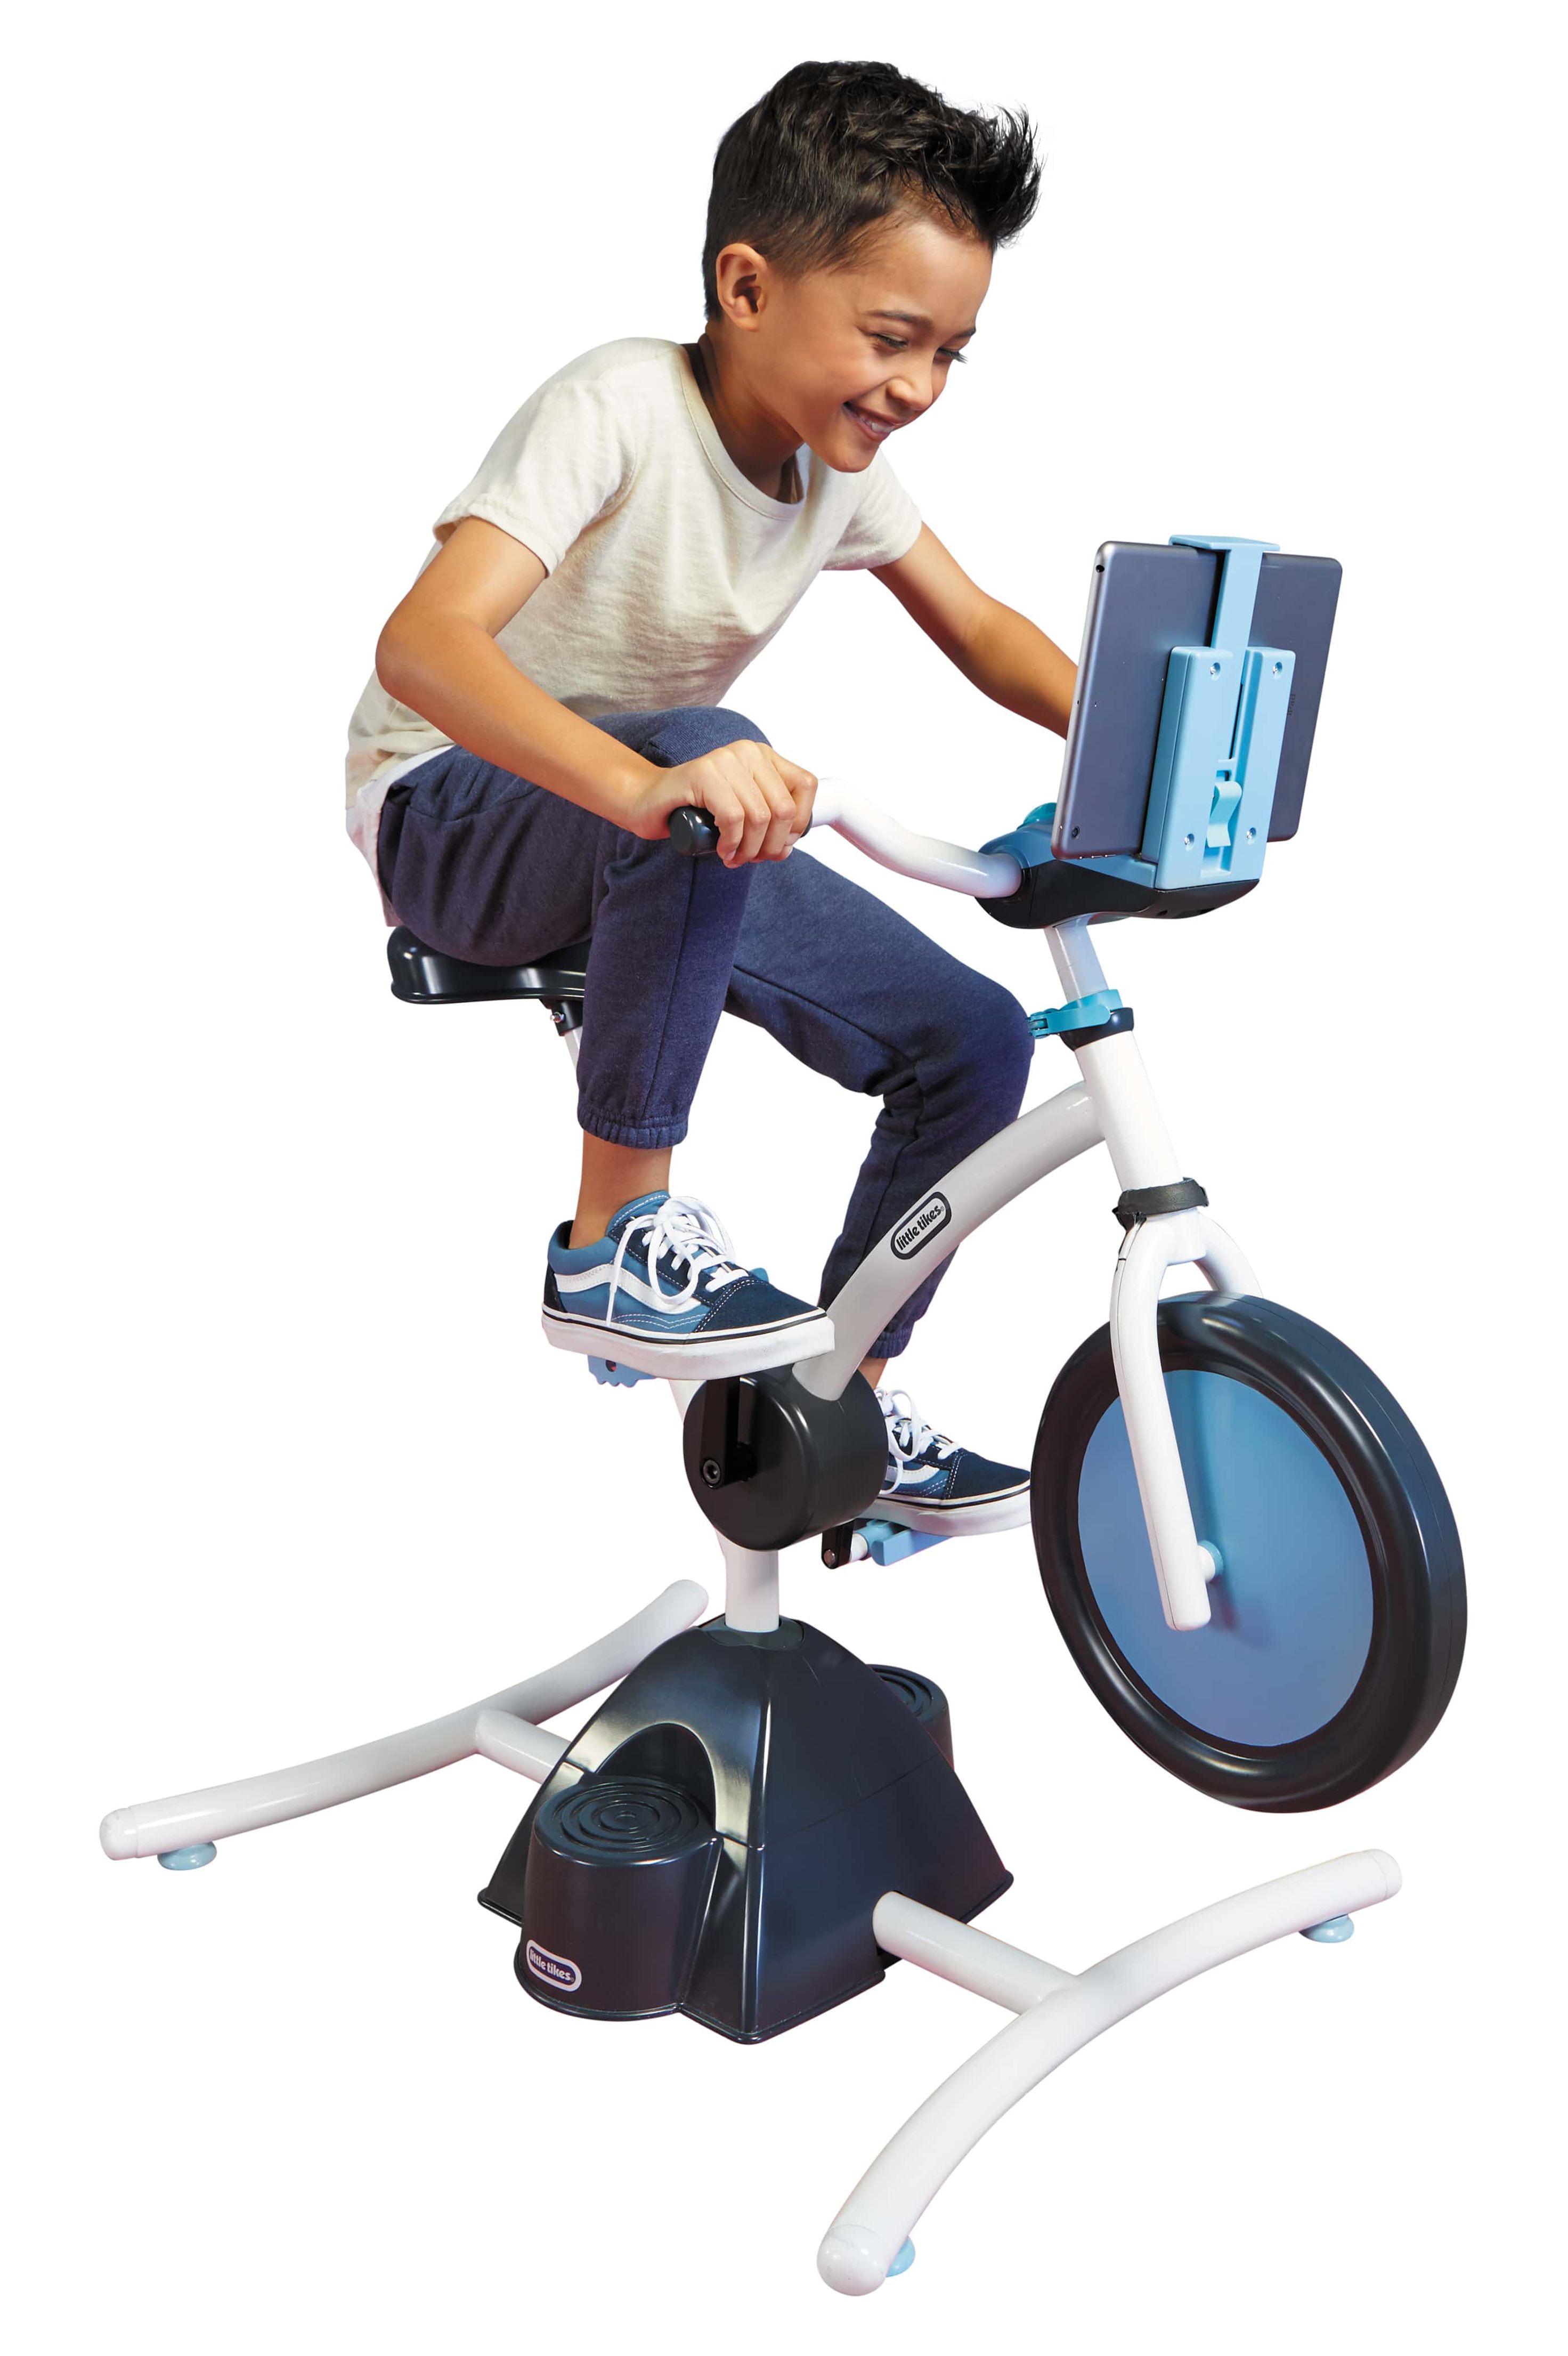 Little Tikes Pelican Explore & Fit Cycle Fun Fitness Adjustable Stationary Bike - image 1 of 10